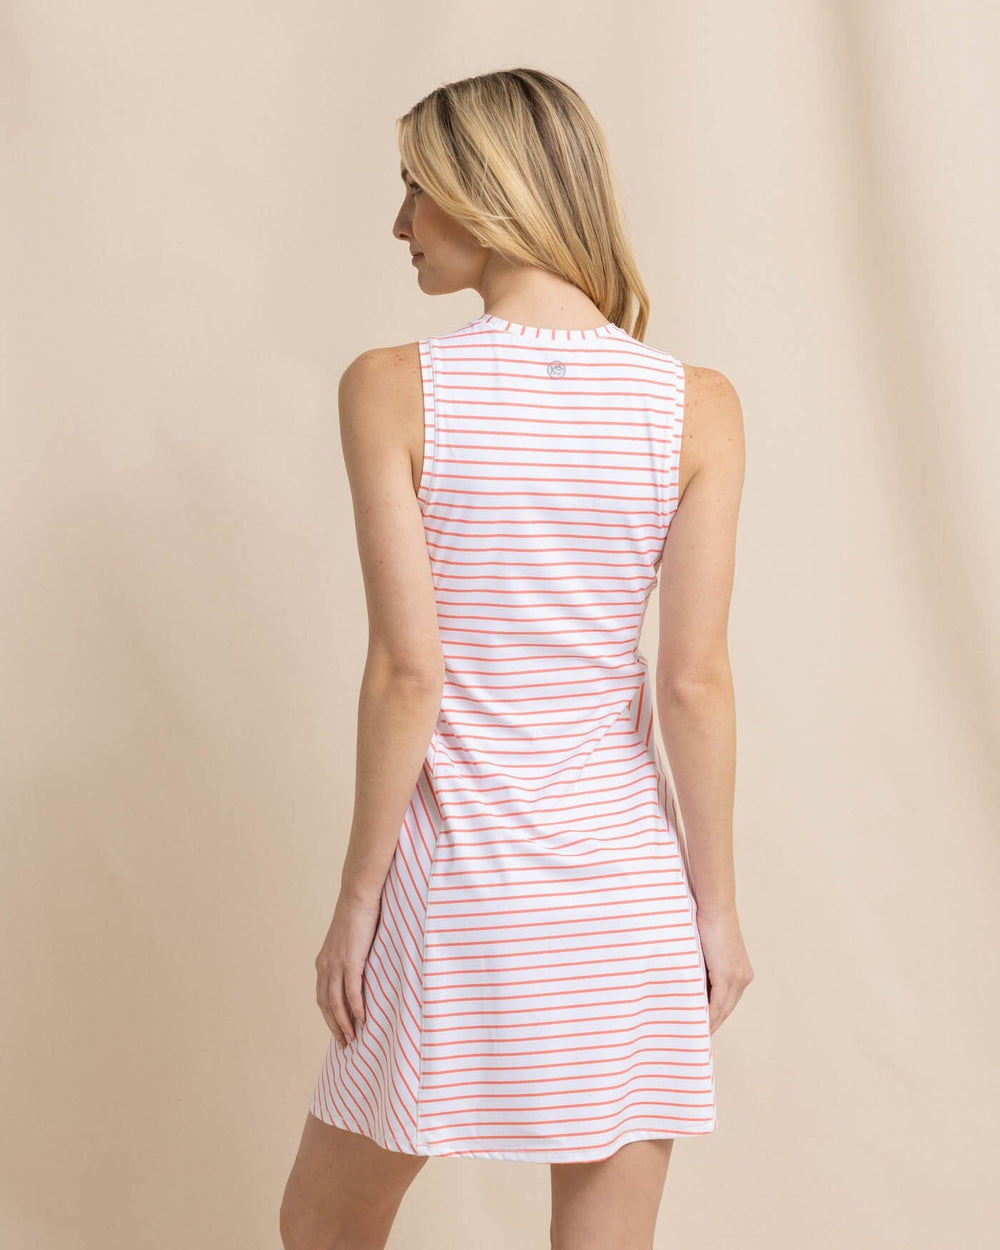 The back view of the Southern Tide Lyllee Striped Performance Dress by Southern Tide - Classic White